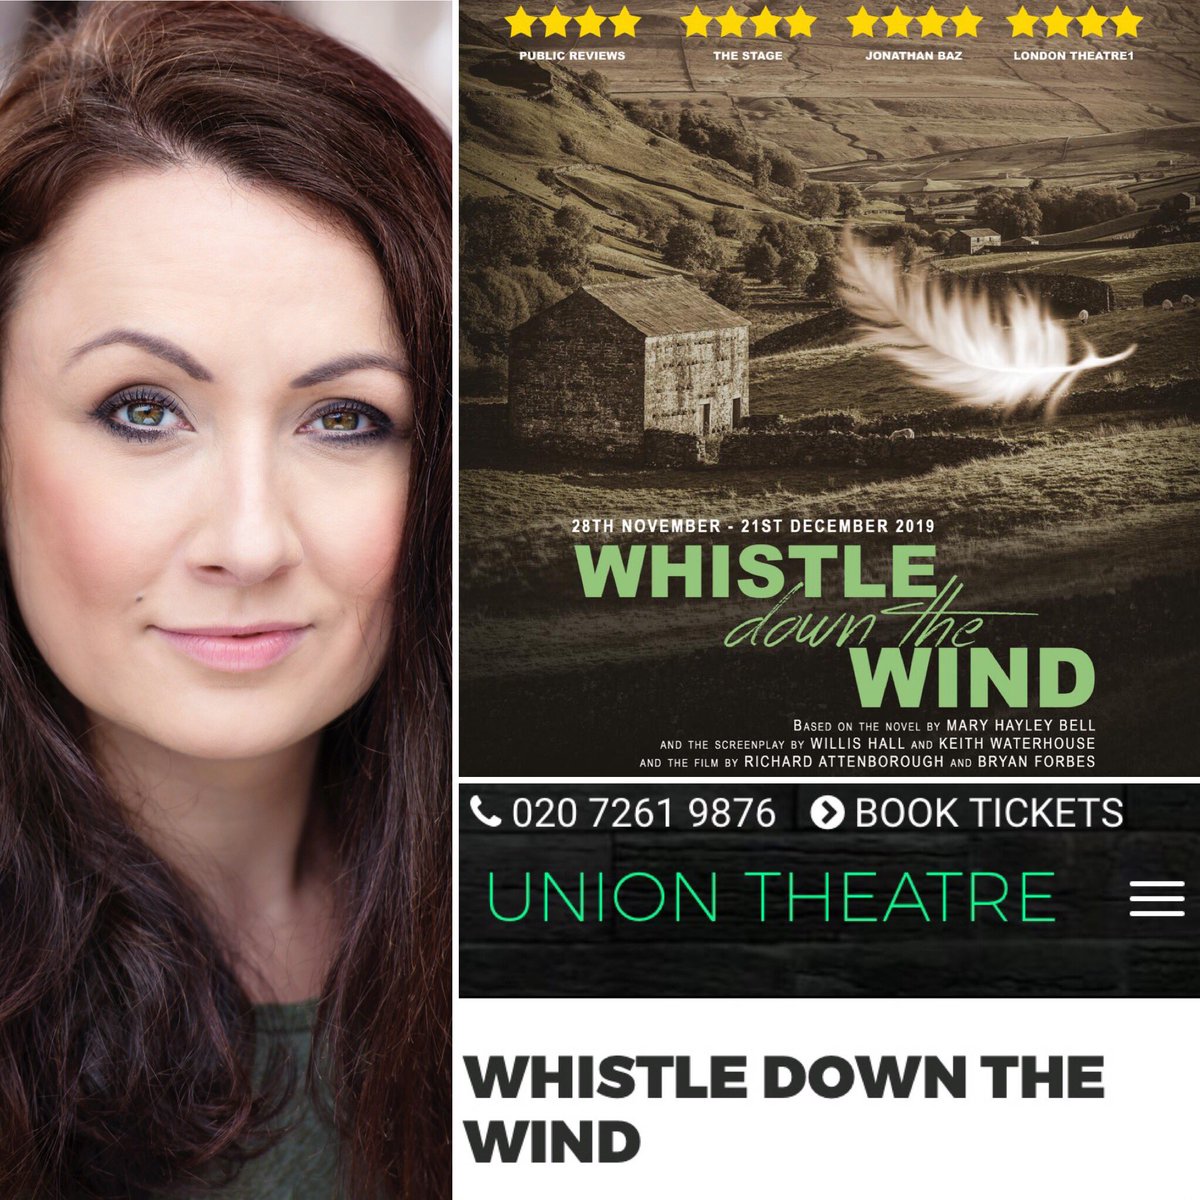 NEWS is out, WEST END debut
‘Whistle Down the Wind’ 28th November- 21st December 2019 at the Union Theatre, London 
uniontheatre.biz/whistle-down-t…

#uniontheatre #artlenhouseassociates #westend #theuniontheatre #whistledownthewind @TheUnionTheatre @ArtlenHouse @TheStage @MTAS_Official